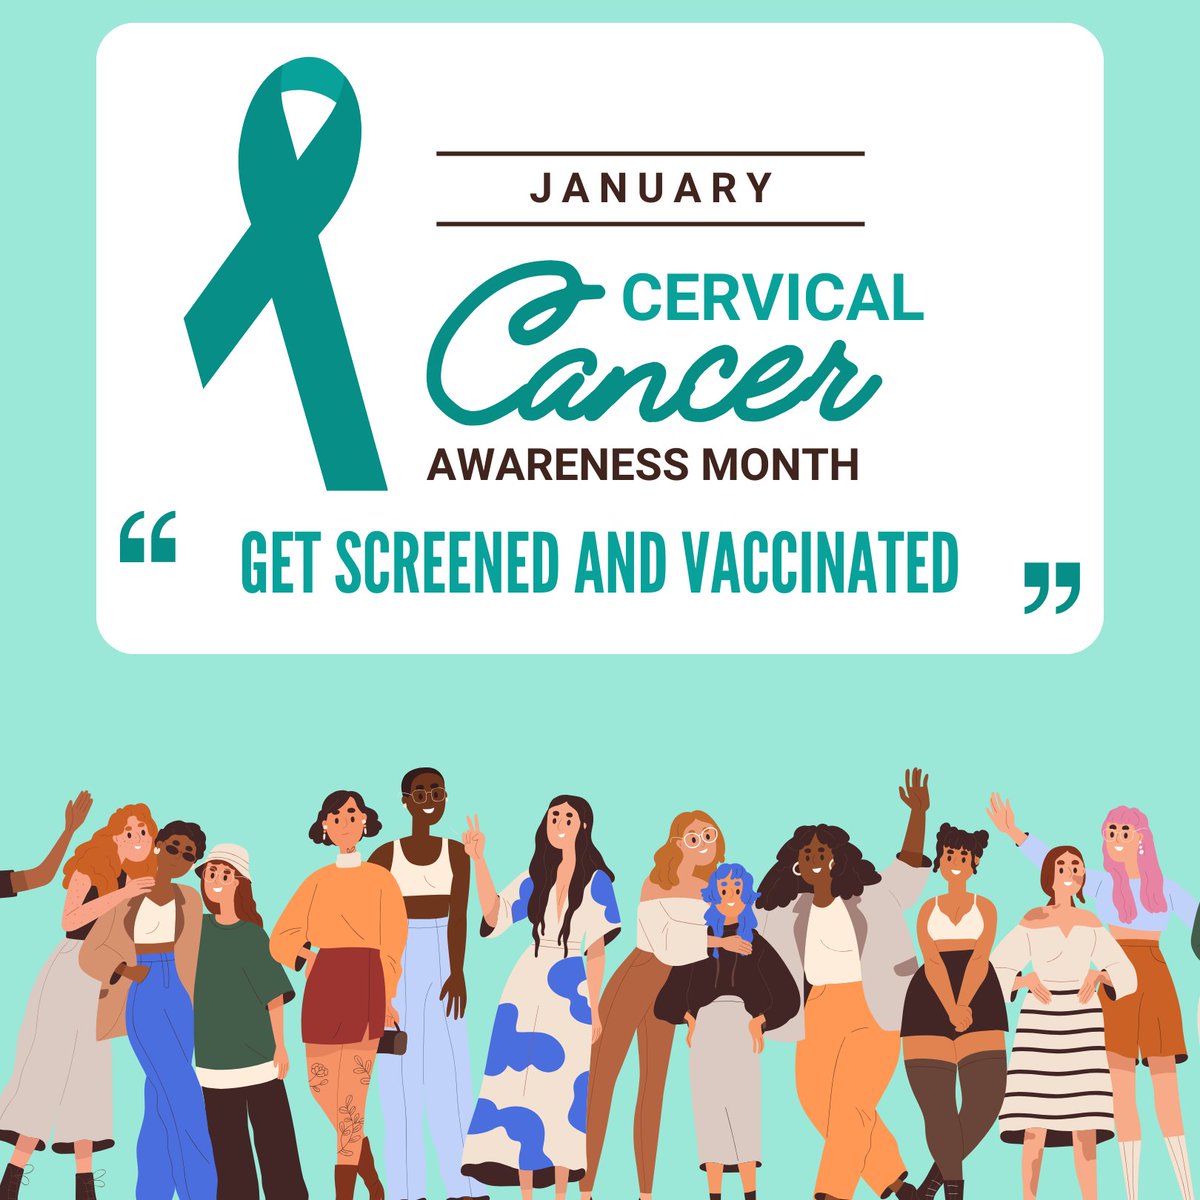 This January, let's make cervical cancer prevention a priority! ❤️ Schedule that overdue Pap test and defend your health! Regular cervical cancer screening gives you the power to stop this disease before it starts. #CervicalHealthAwareness Month